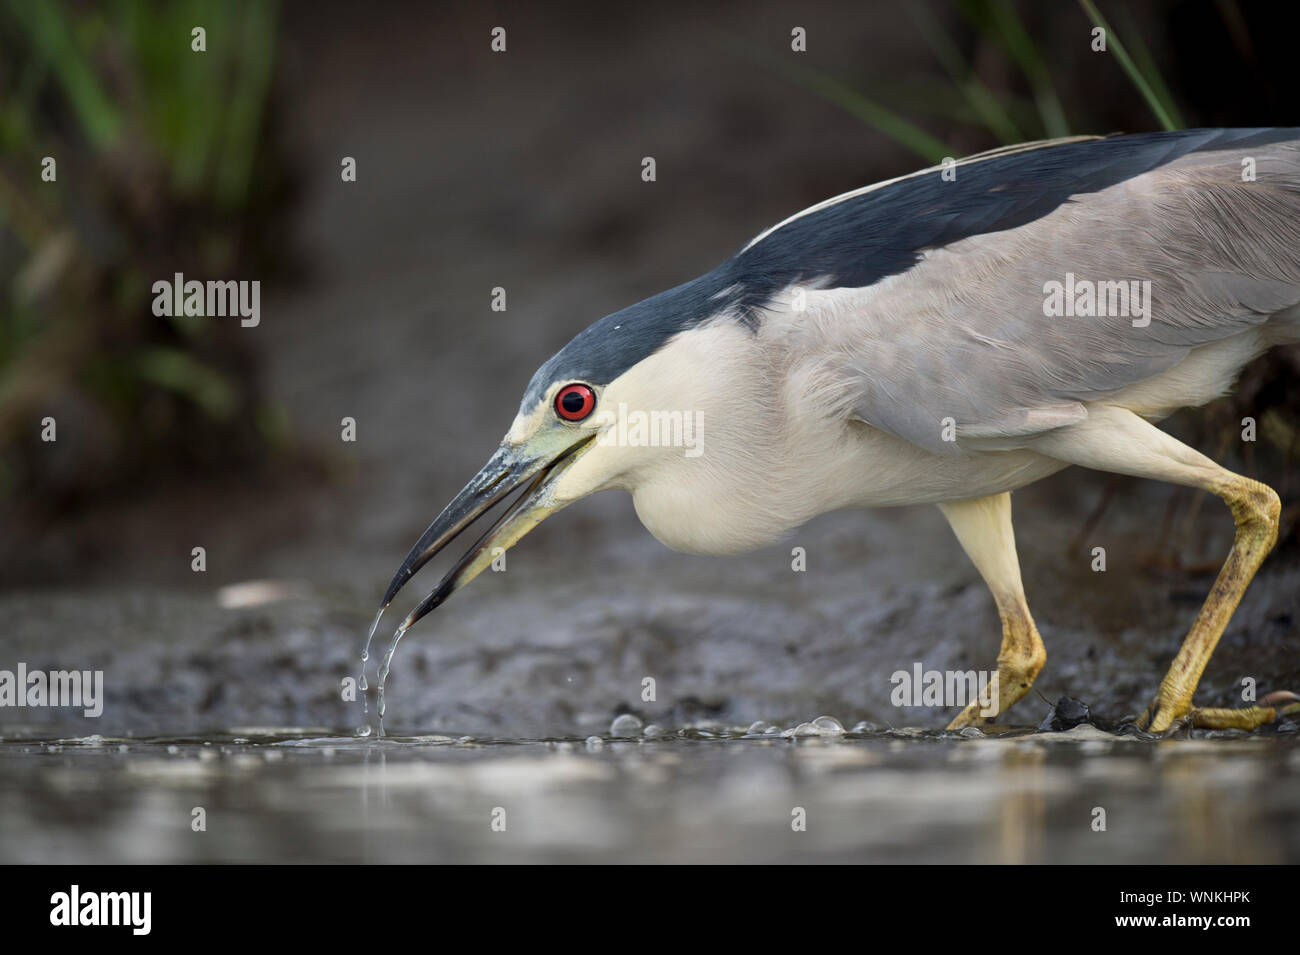 A Black-crowned Night Heron stalks the shallow water in search of food in soft light with its bright red eye standing out. Stock Photo